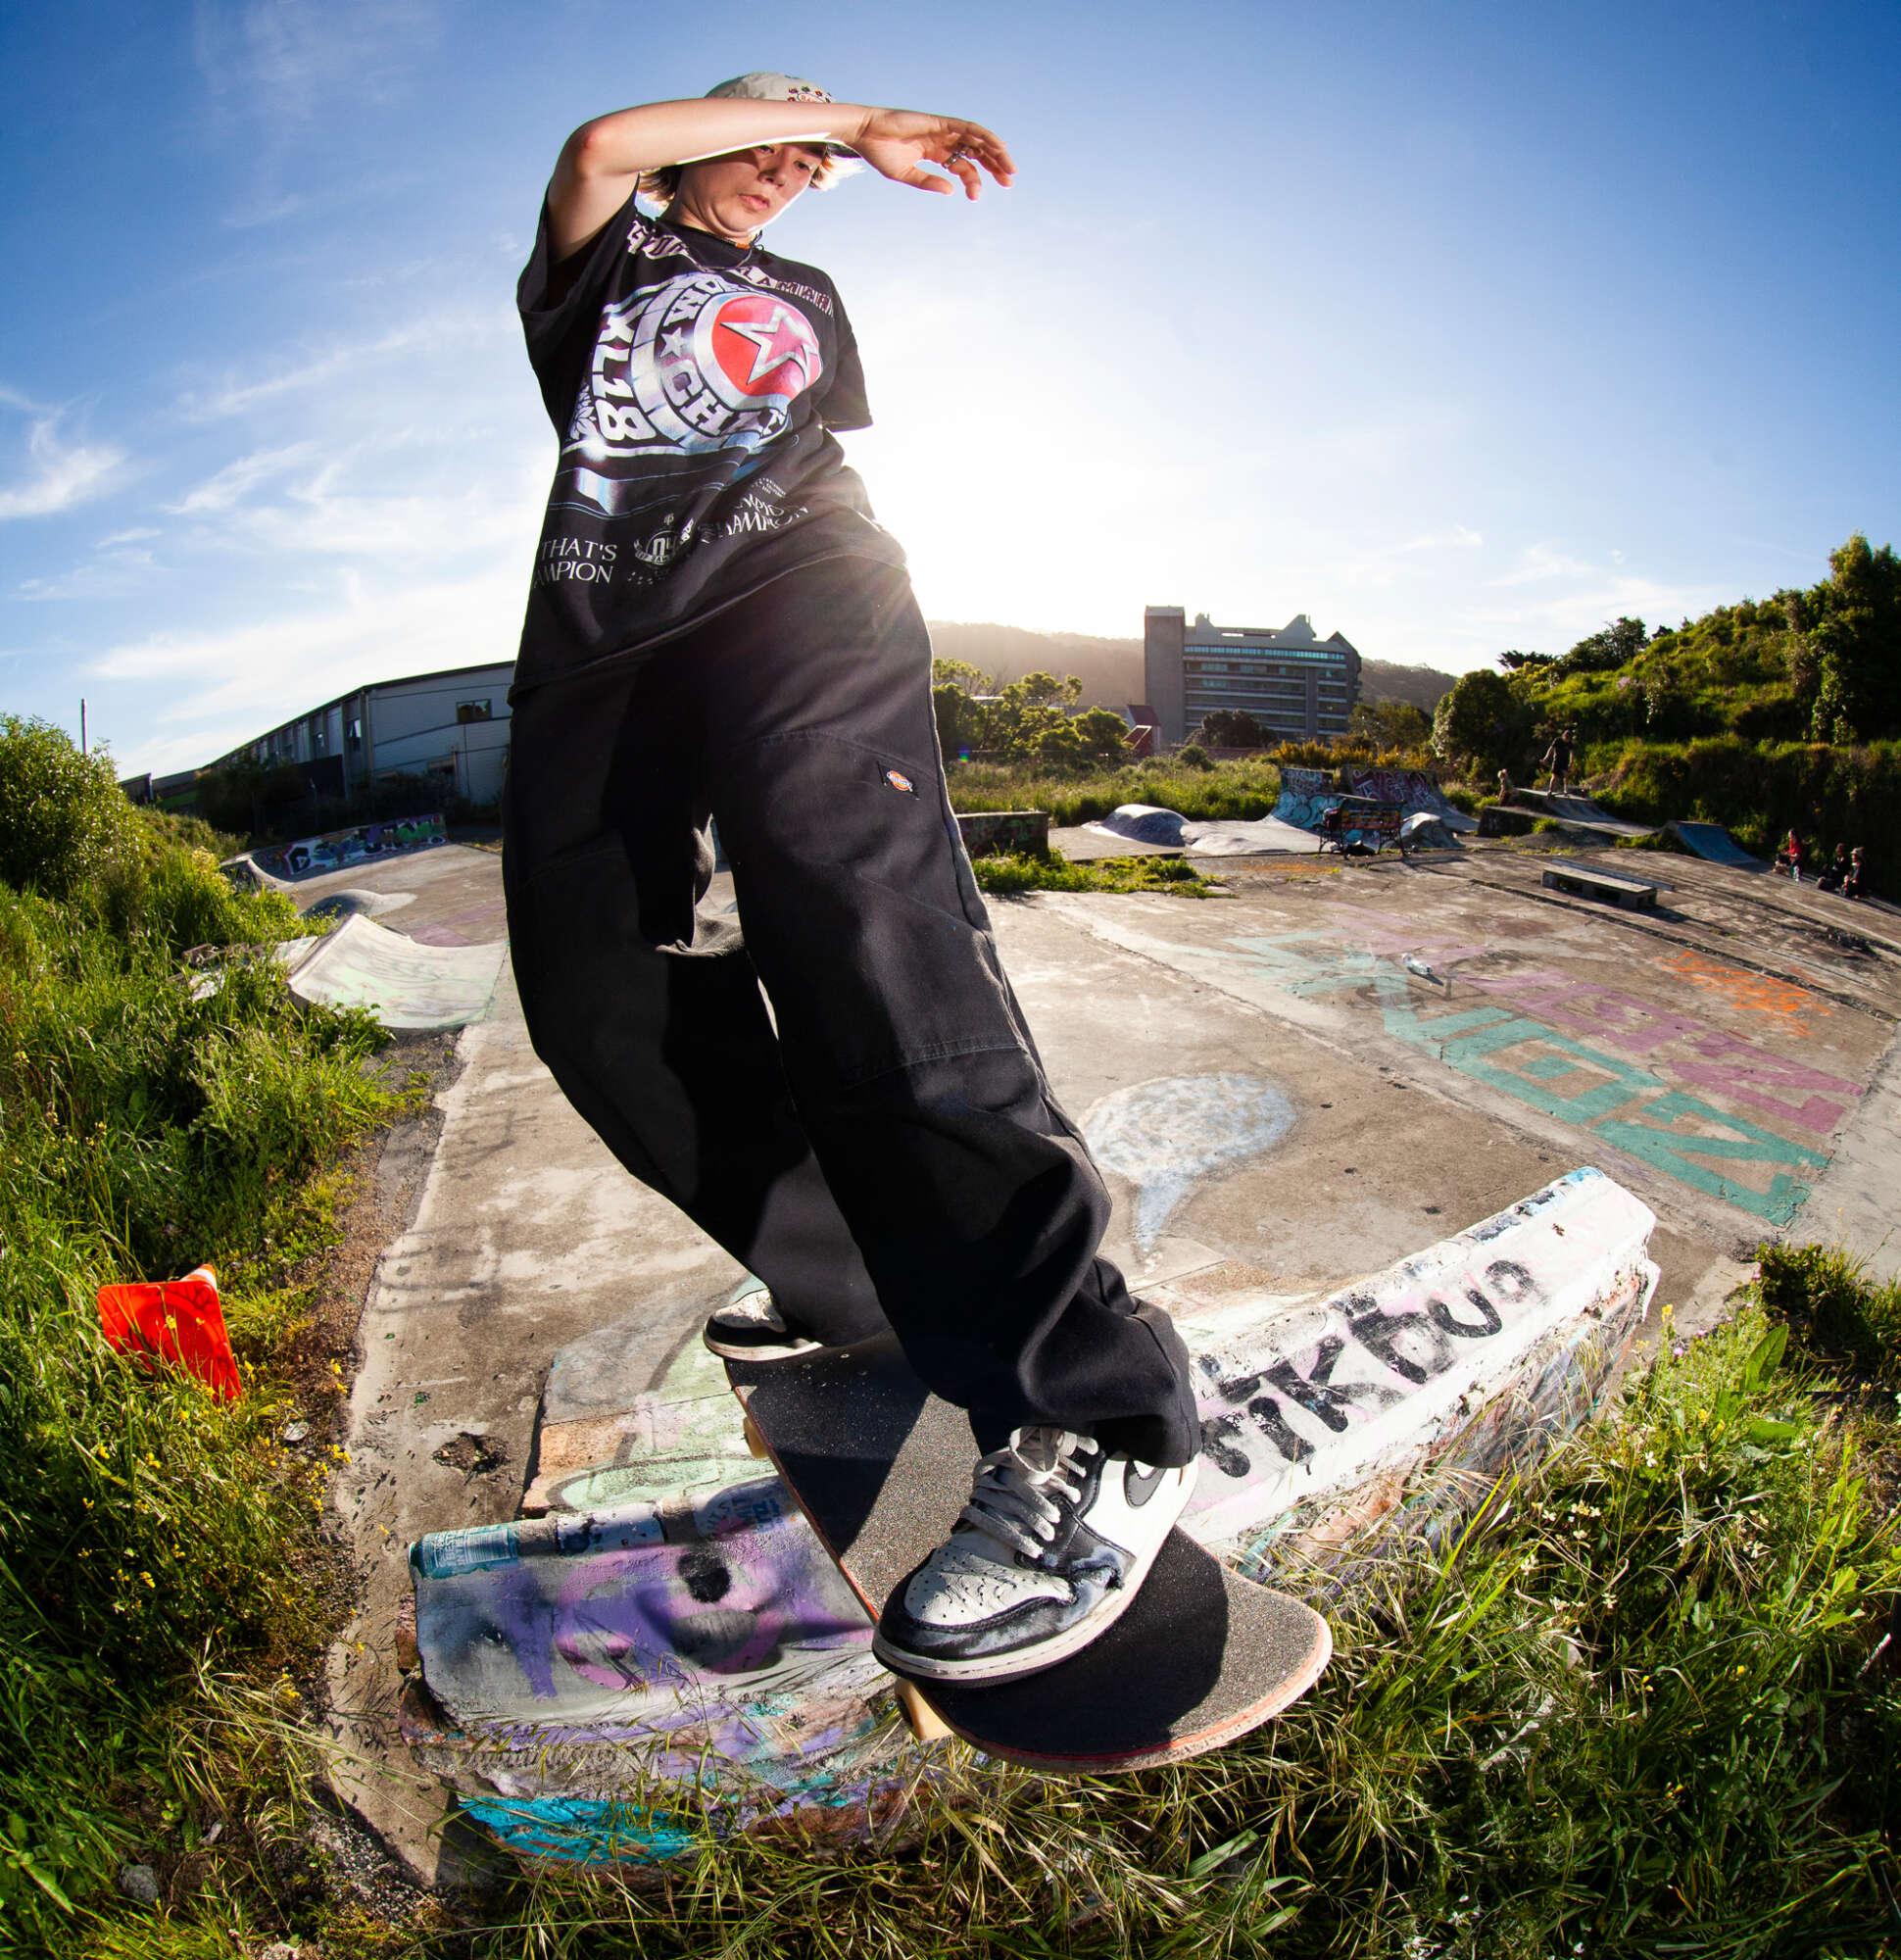 Gala Baumfield performing a frontside rock n roll skateboard trick on a quarterpipe at Newtown, Wellington's Ghetto DIY Spot.